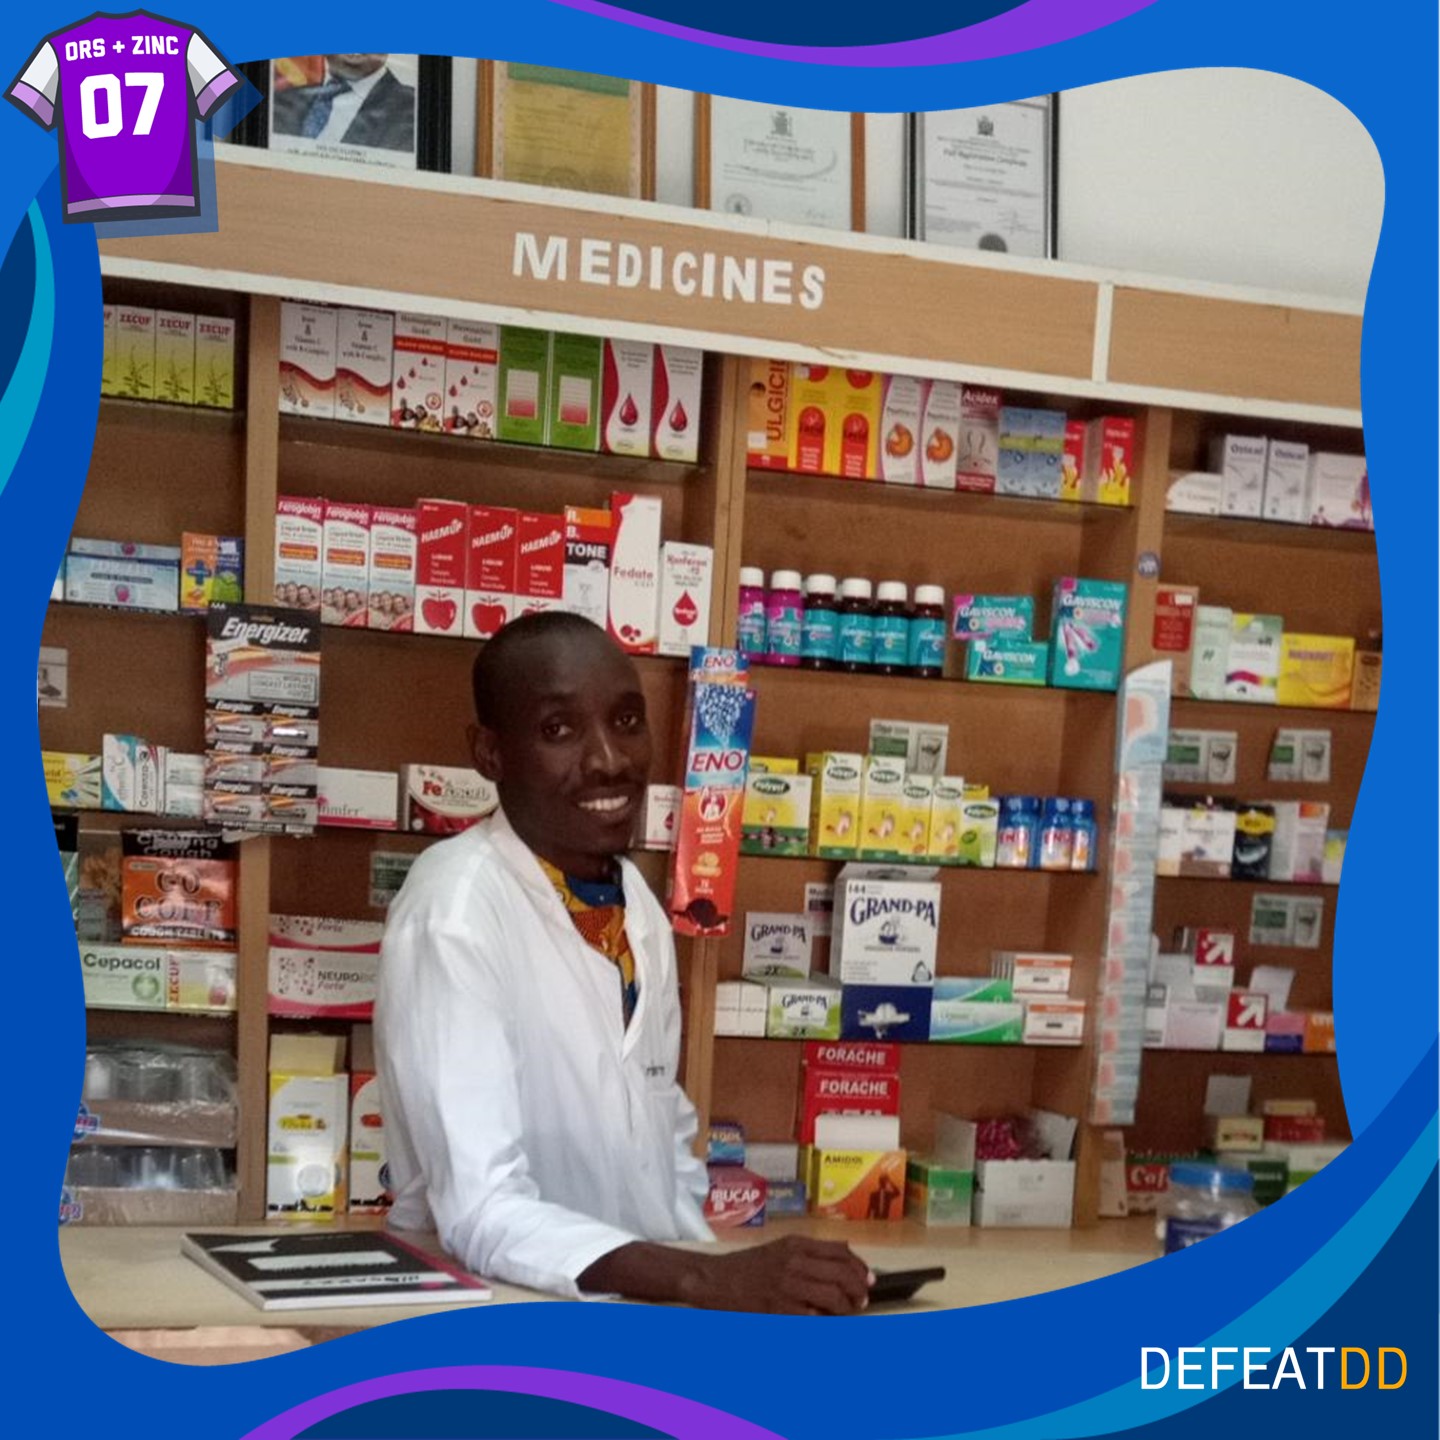 A pharmacist from Zambia smiling behind a counter 